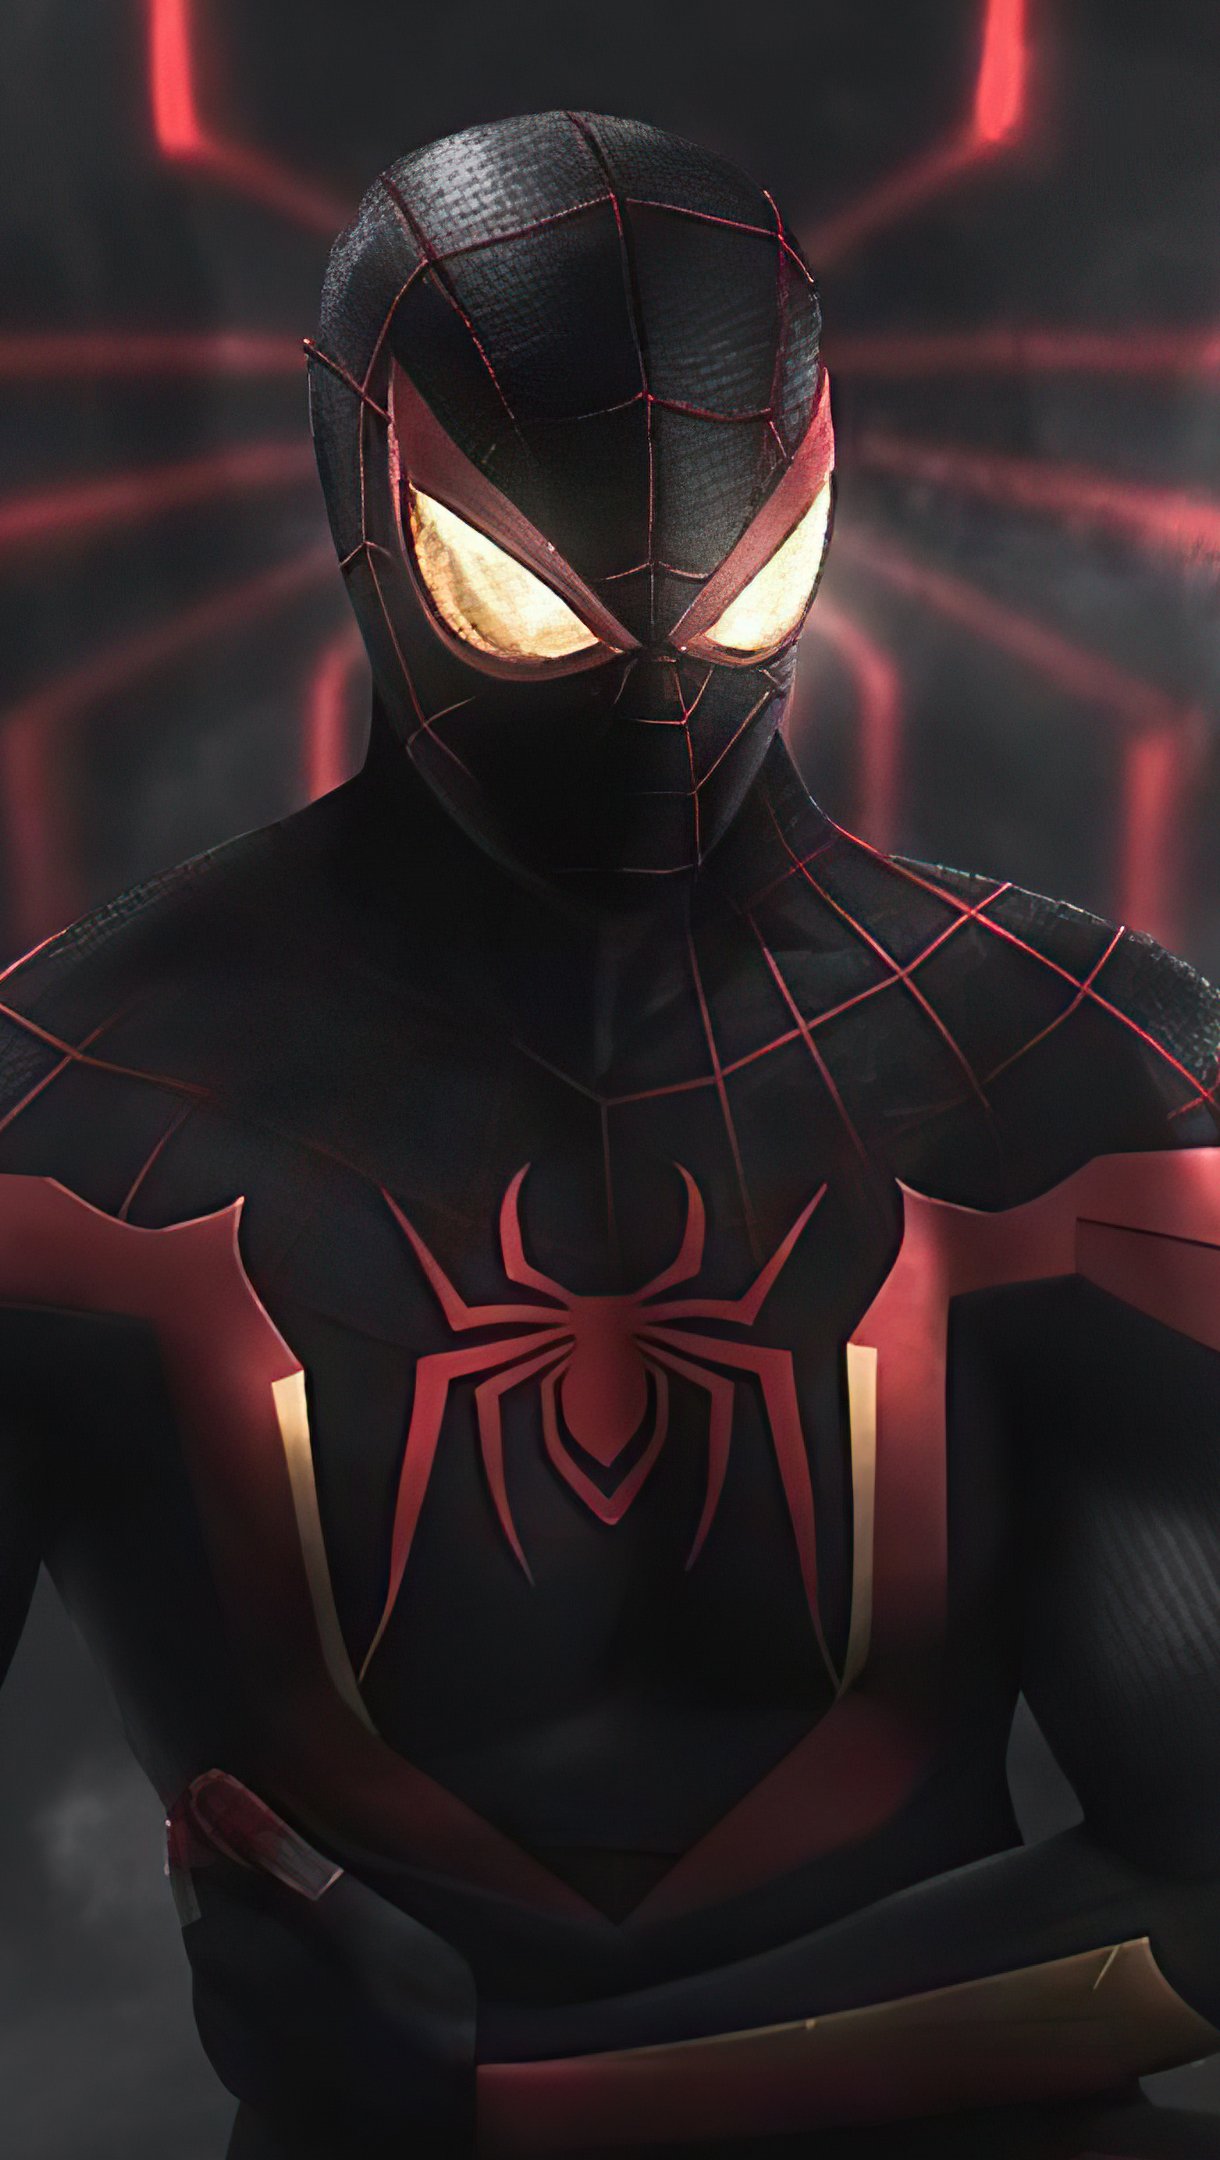 Spiderman with black and red suit Wallpaper 4k Ultra HD ID:6074